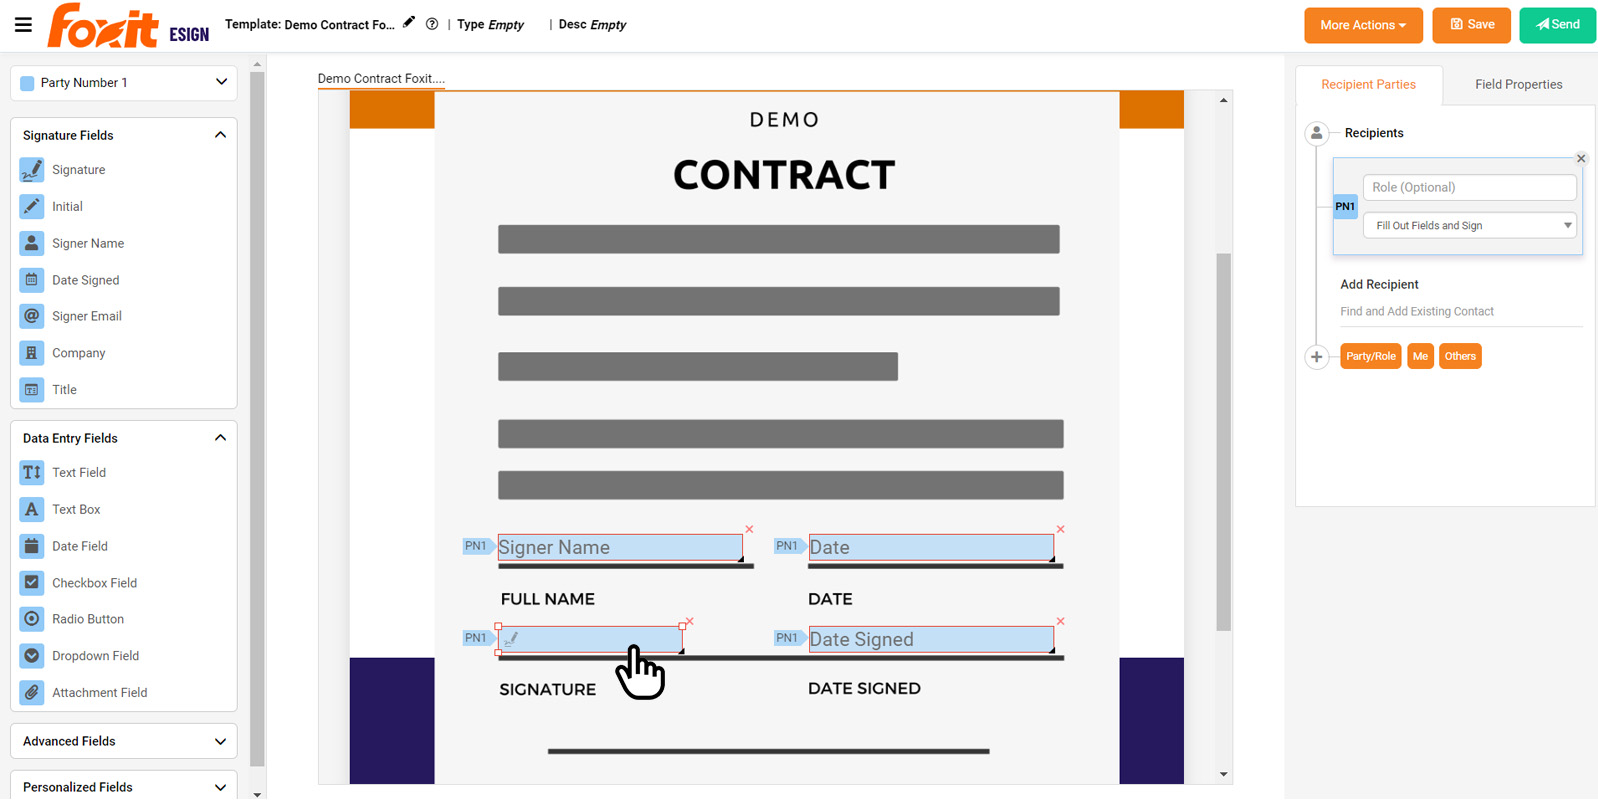 Upload and enhance your existing forms by dropping secure signature blocks, checkboxes, radio buttons, typable fields, initial fields, dropdown menus, conditional menus, validation rules, and more!